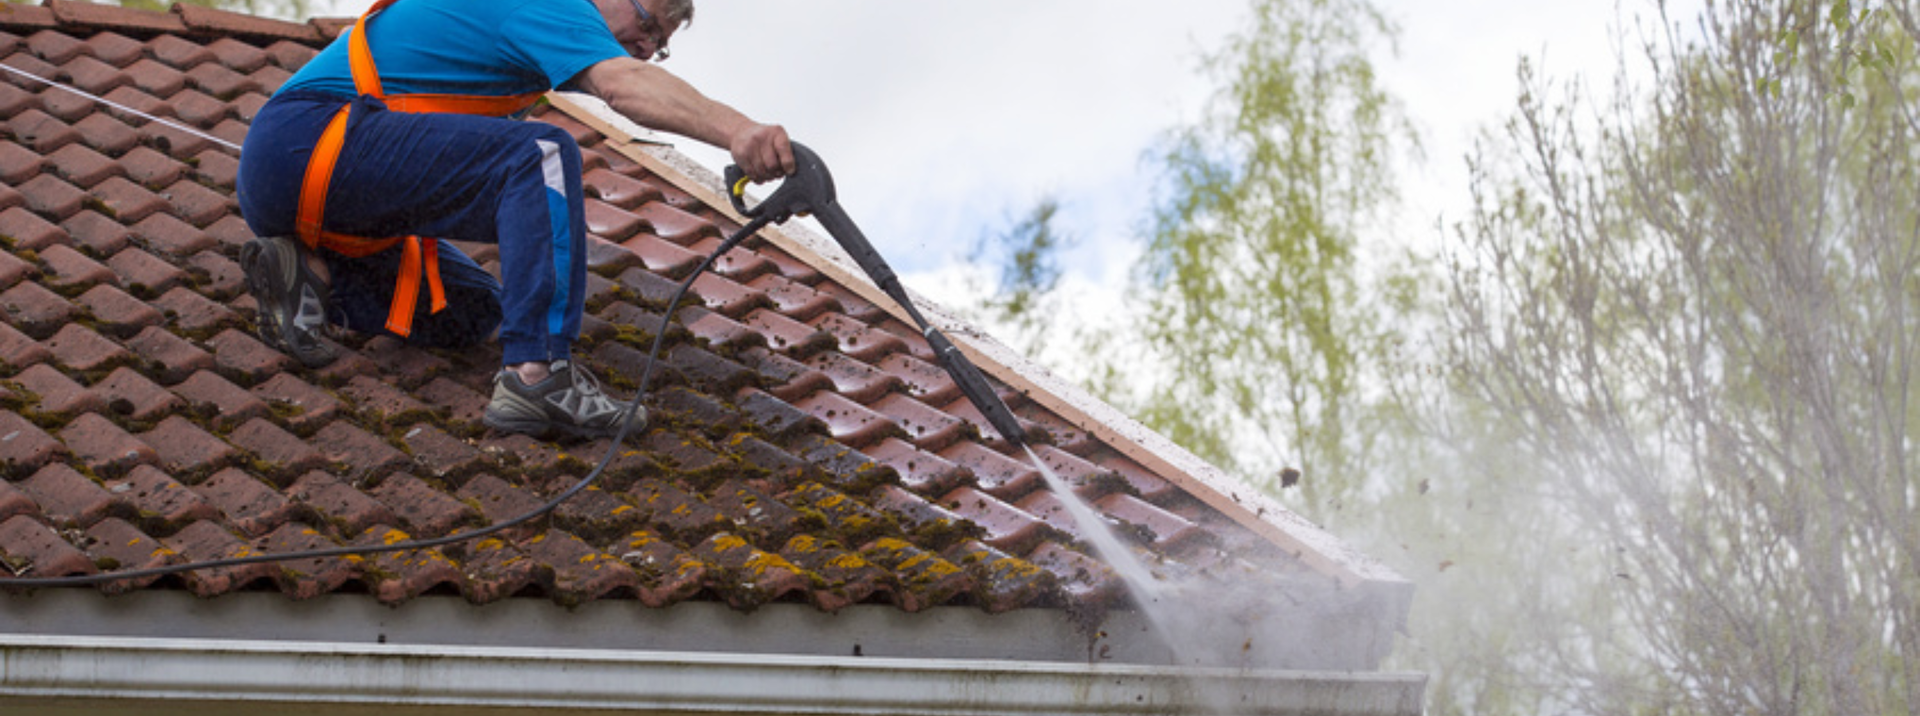 Keep Your Gutters Clean